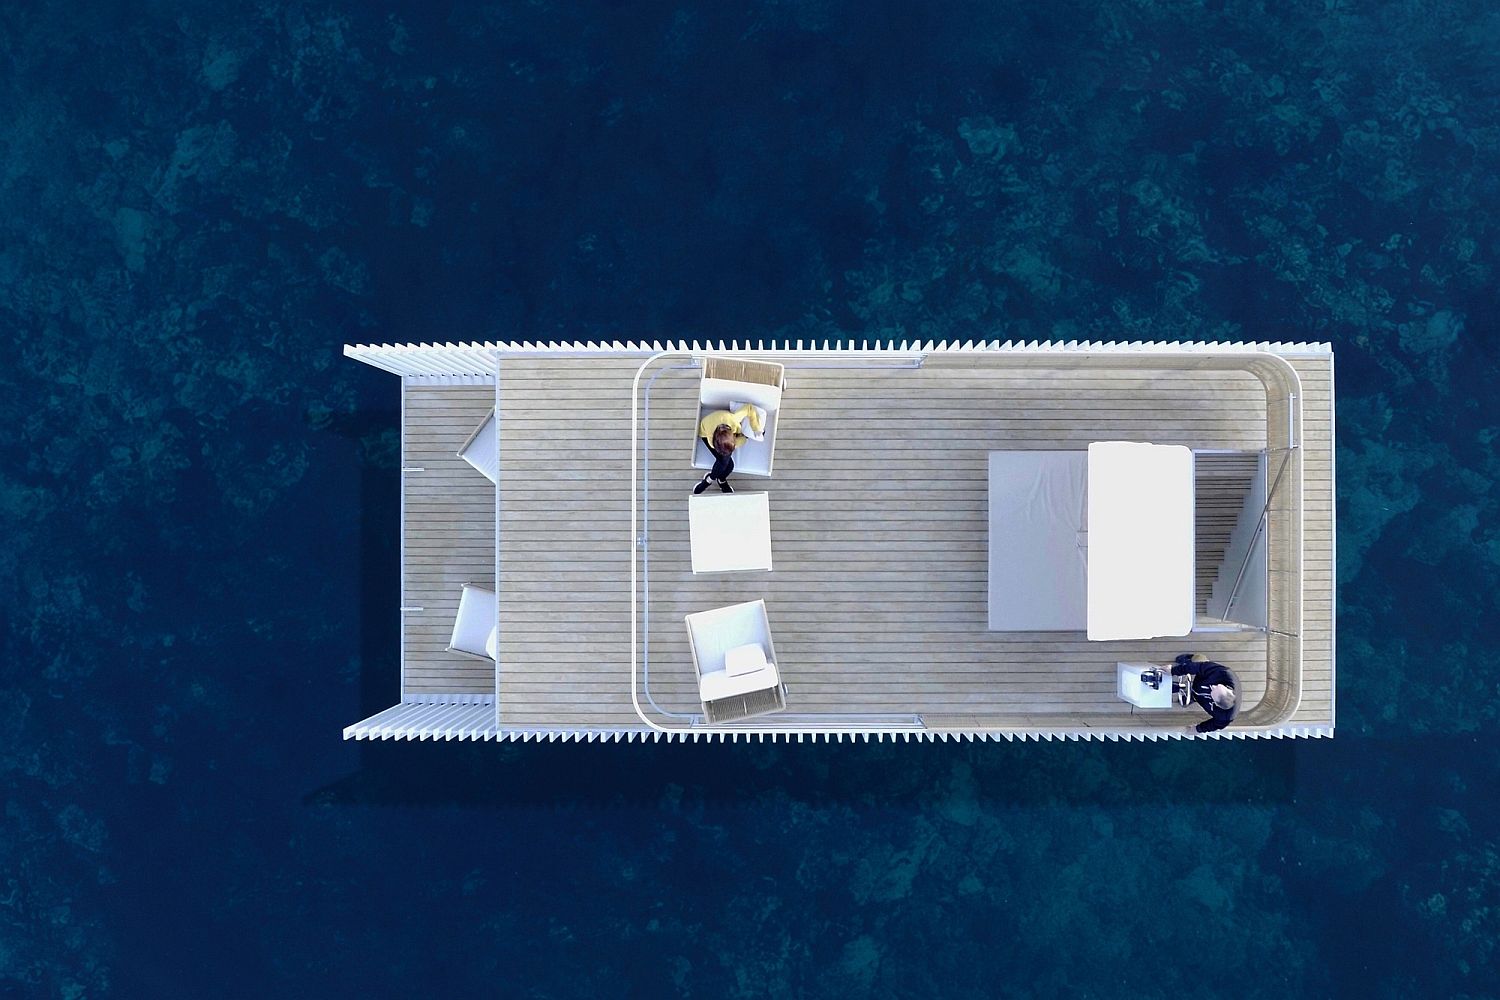 Punta-de-Mar-Marina-Lodge-offers-a-sustainable-floating-hangout